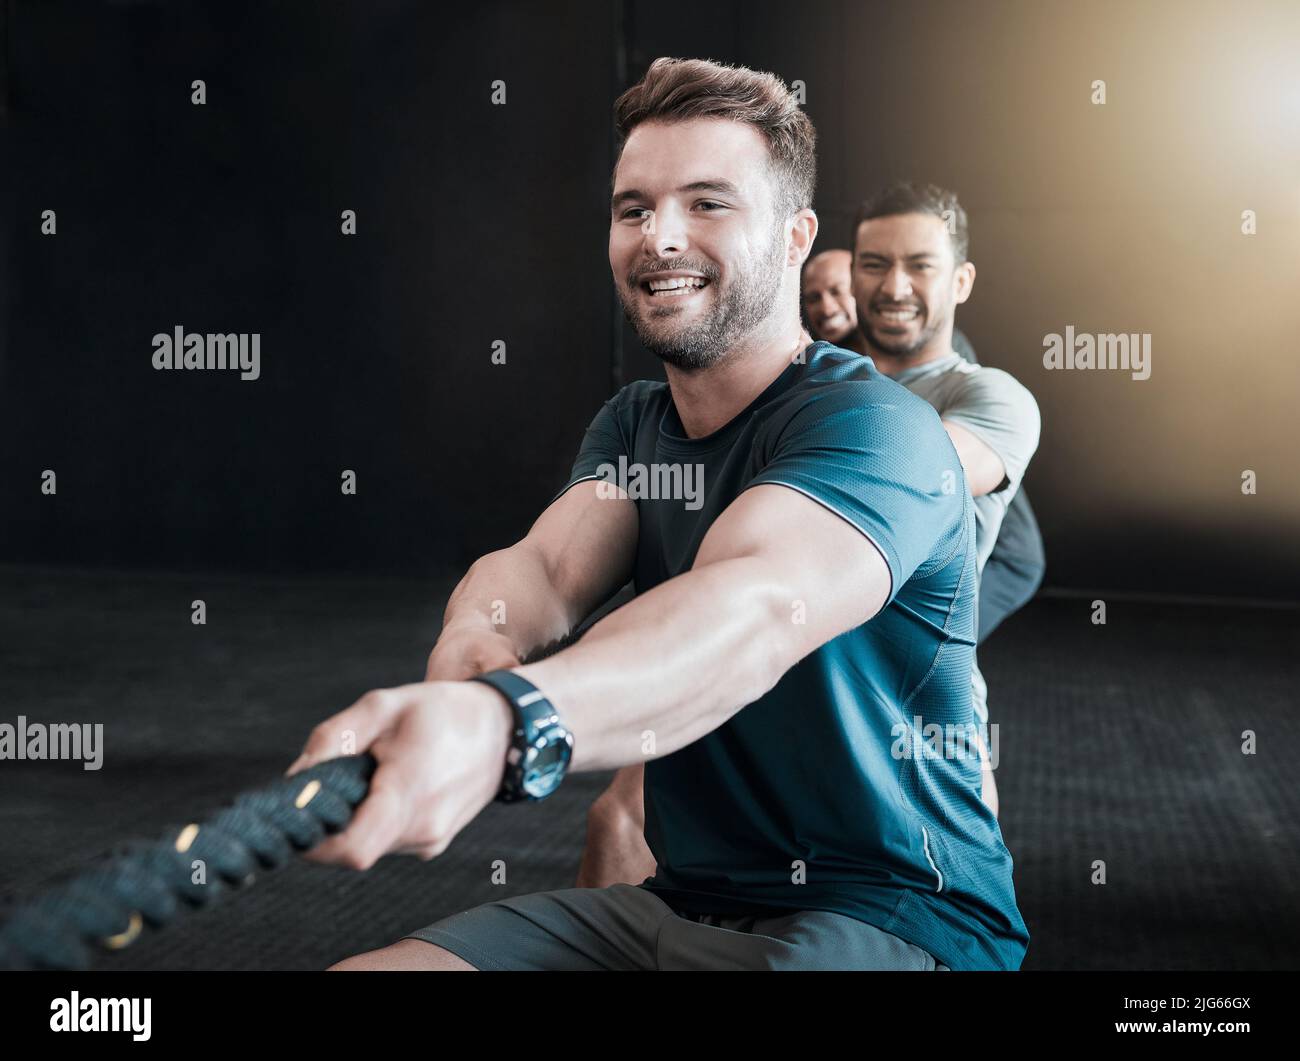 https://c8.alamy.com/comp/2JG66GX/its-all-in-the-name-of-fun-shot-of-a-group-of-gym-partners-pulling-a-rope-in-tug-of-war-together-2JG66GX.jpg